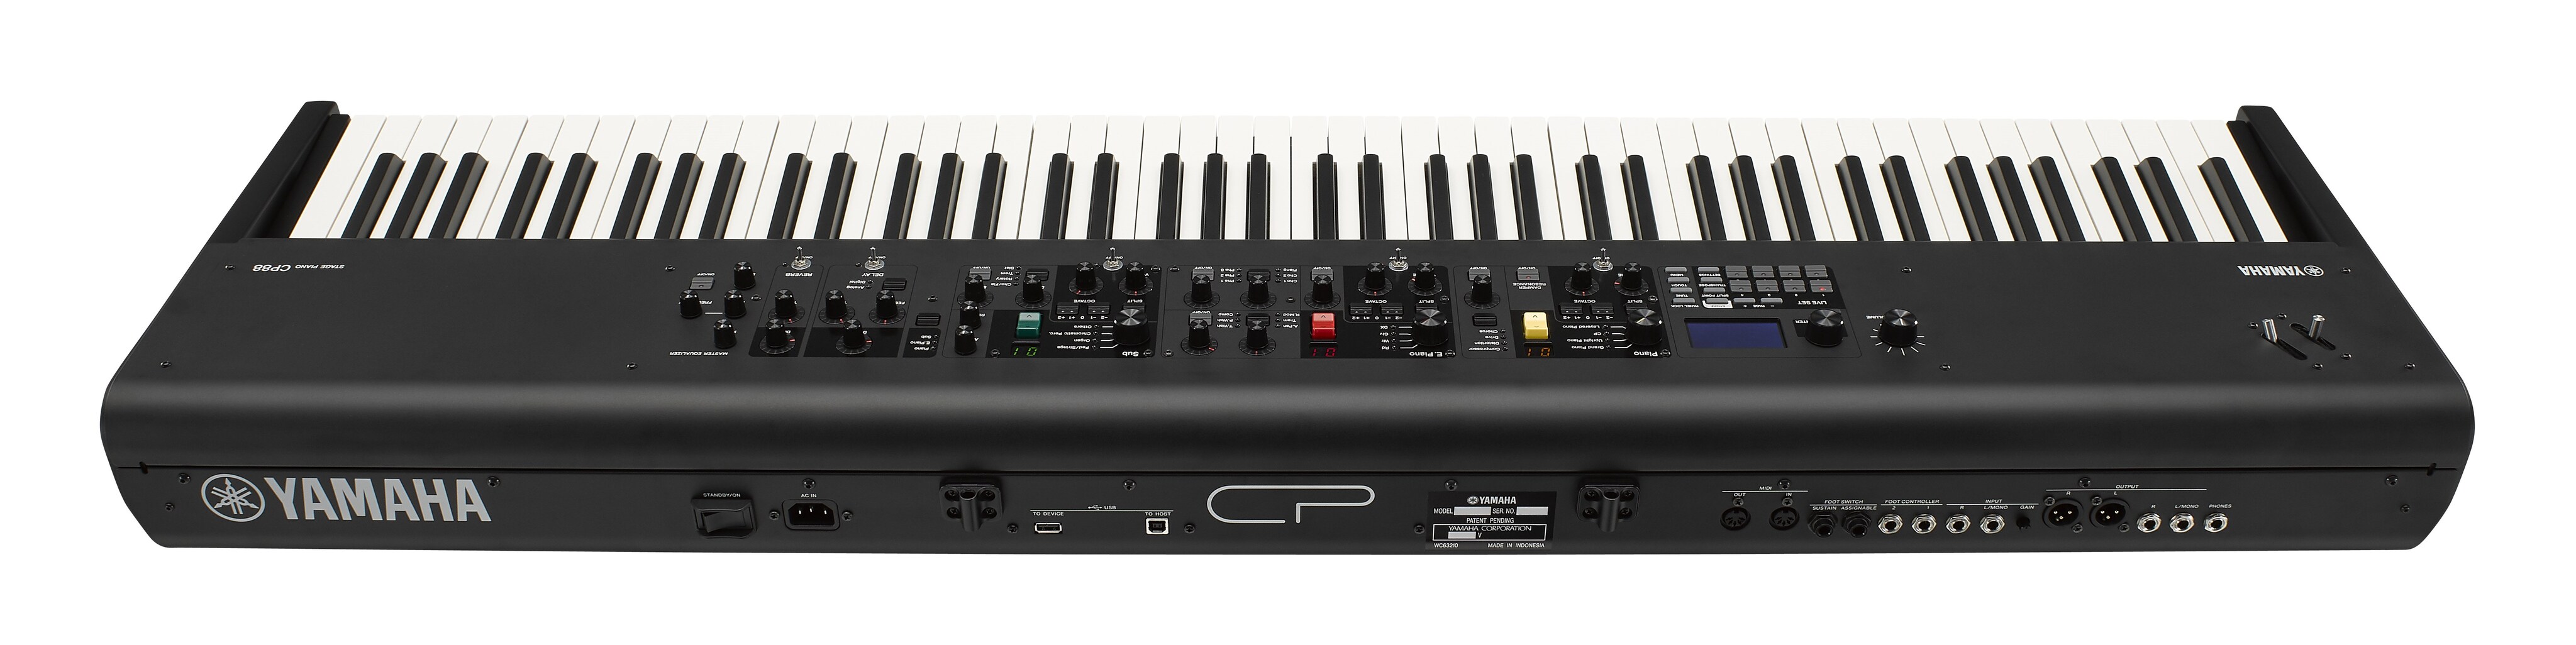 CP88/73 Series - Overview - Stage Keyboards - Synthesizers & Music 